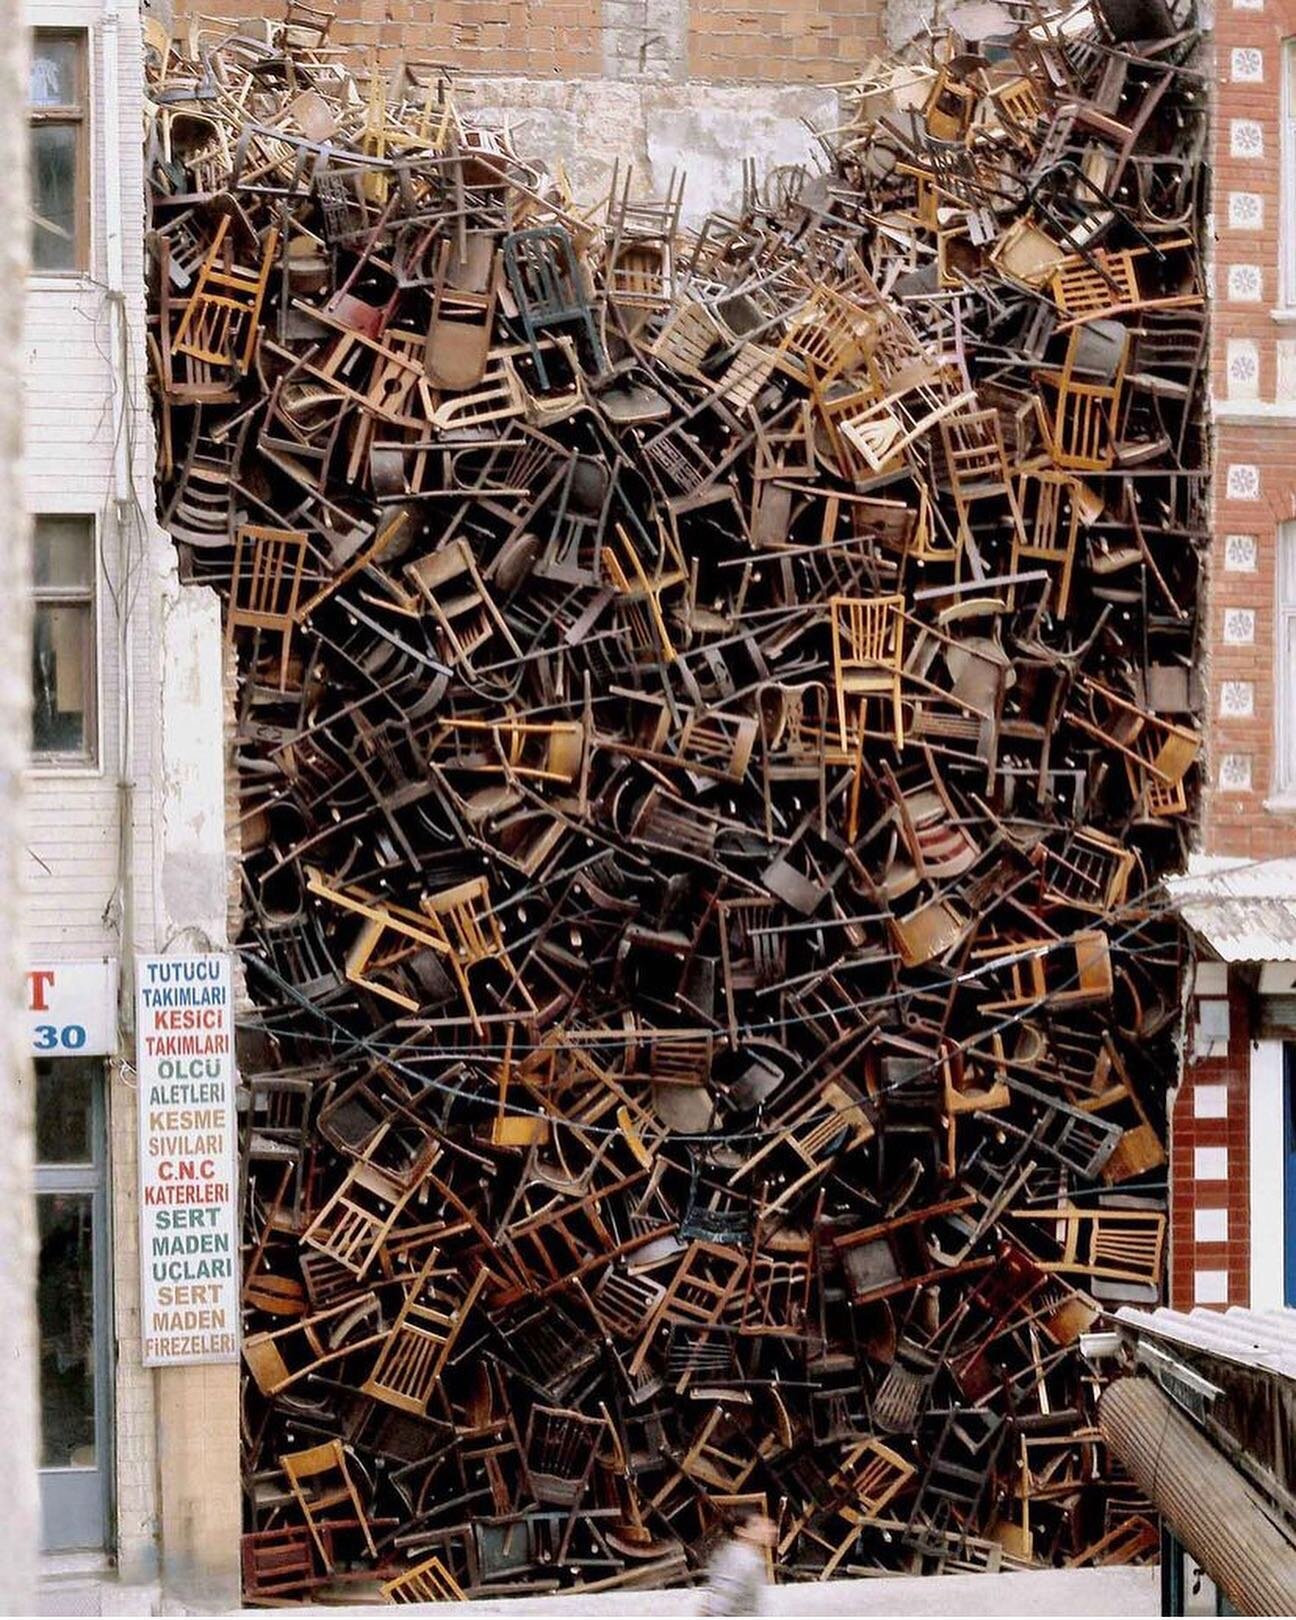 Doris Salcedo tells stories of conflict, loss, and facilitates mourning through every day objects. Because of her, chairs, doors, and blouses find new life as euphemisms, opening conversations about oppression and oppressors, the disempowered and the